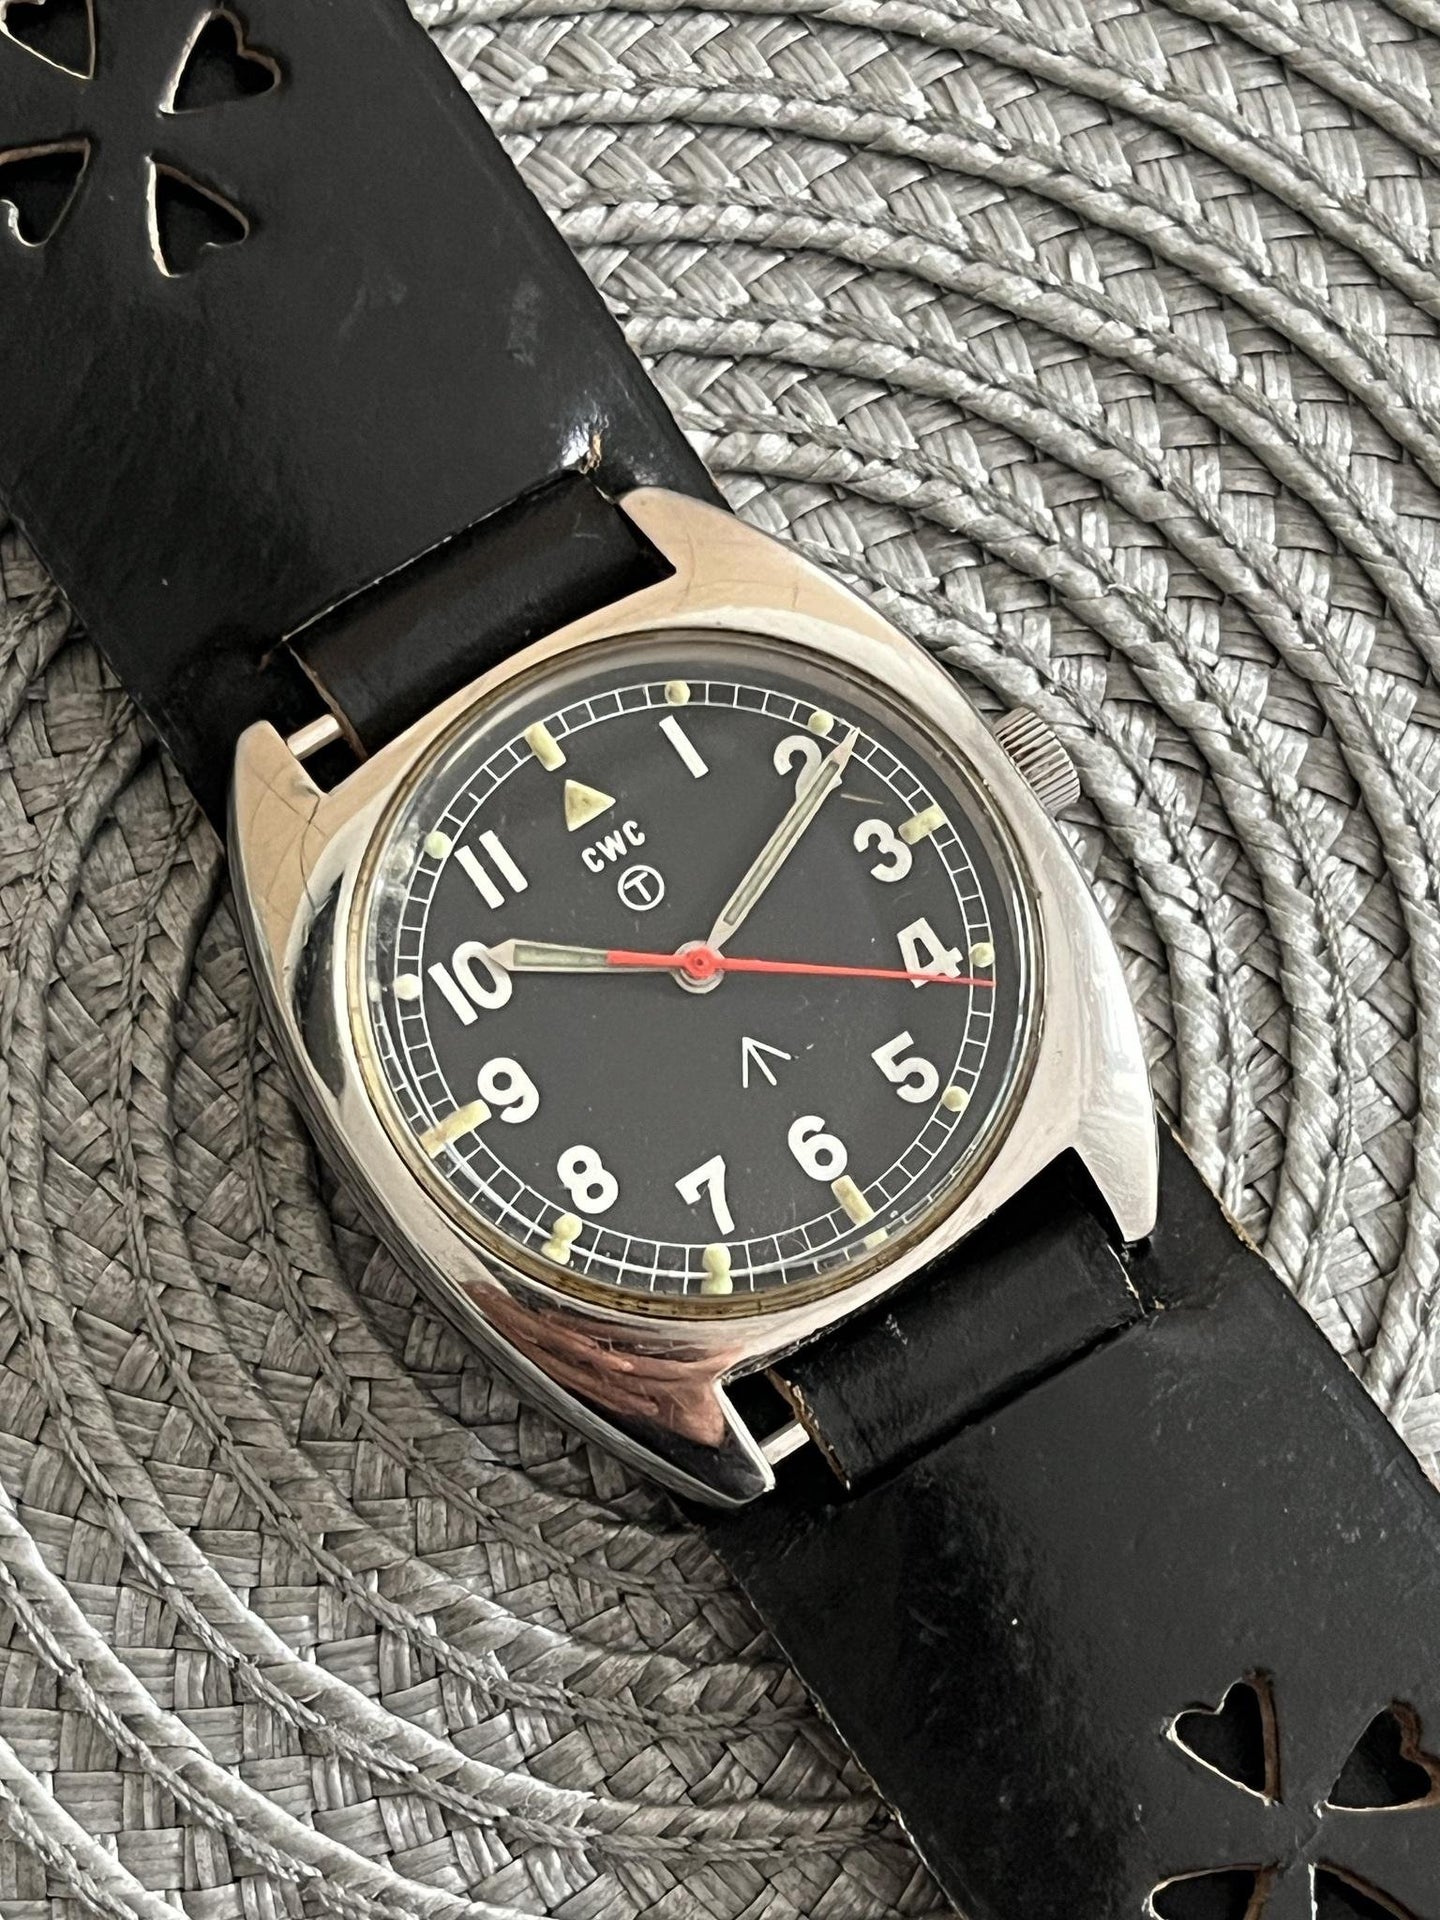 CWC - Cabot Watch Company - W10 Marked Military Watch - Issued